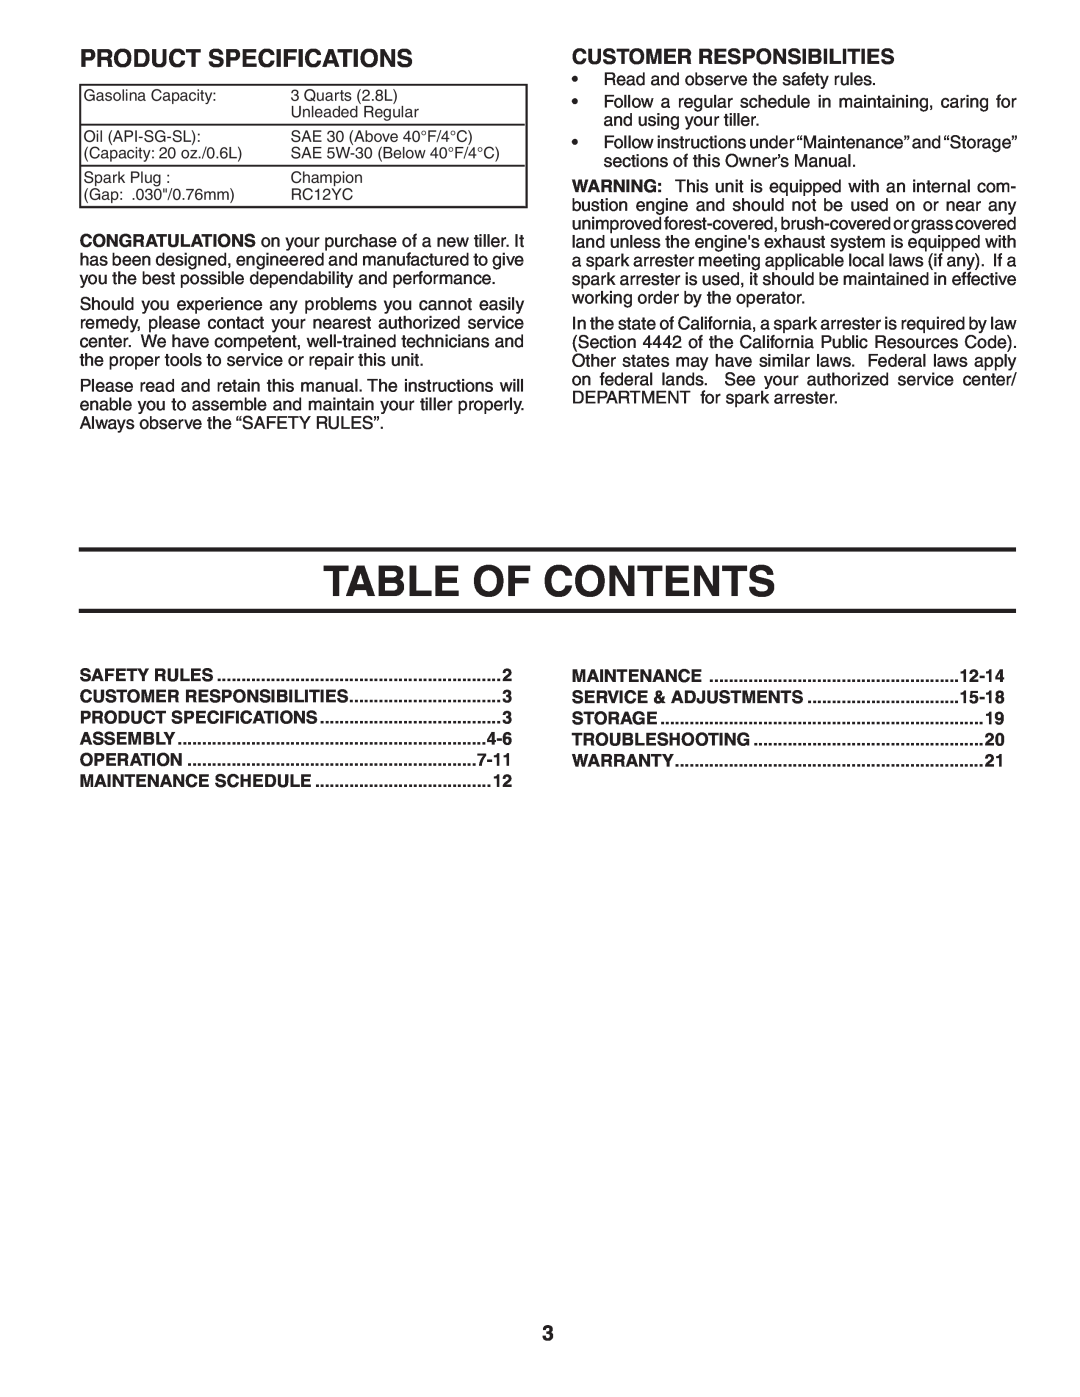 Poulan DRT65 manual Table Of Contents, Product Specifications, Customer Responsibilities, 12-14, 15-18, 7-11 